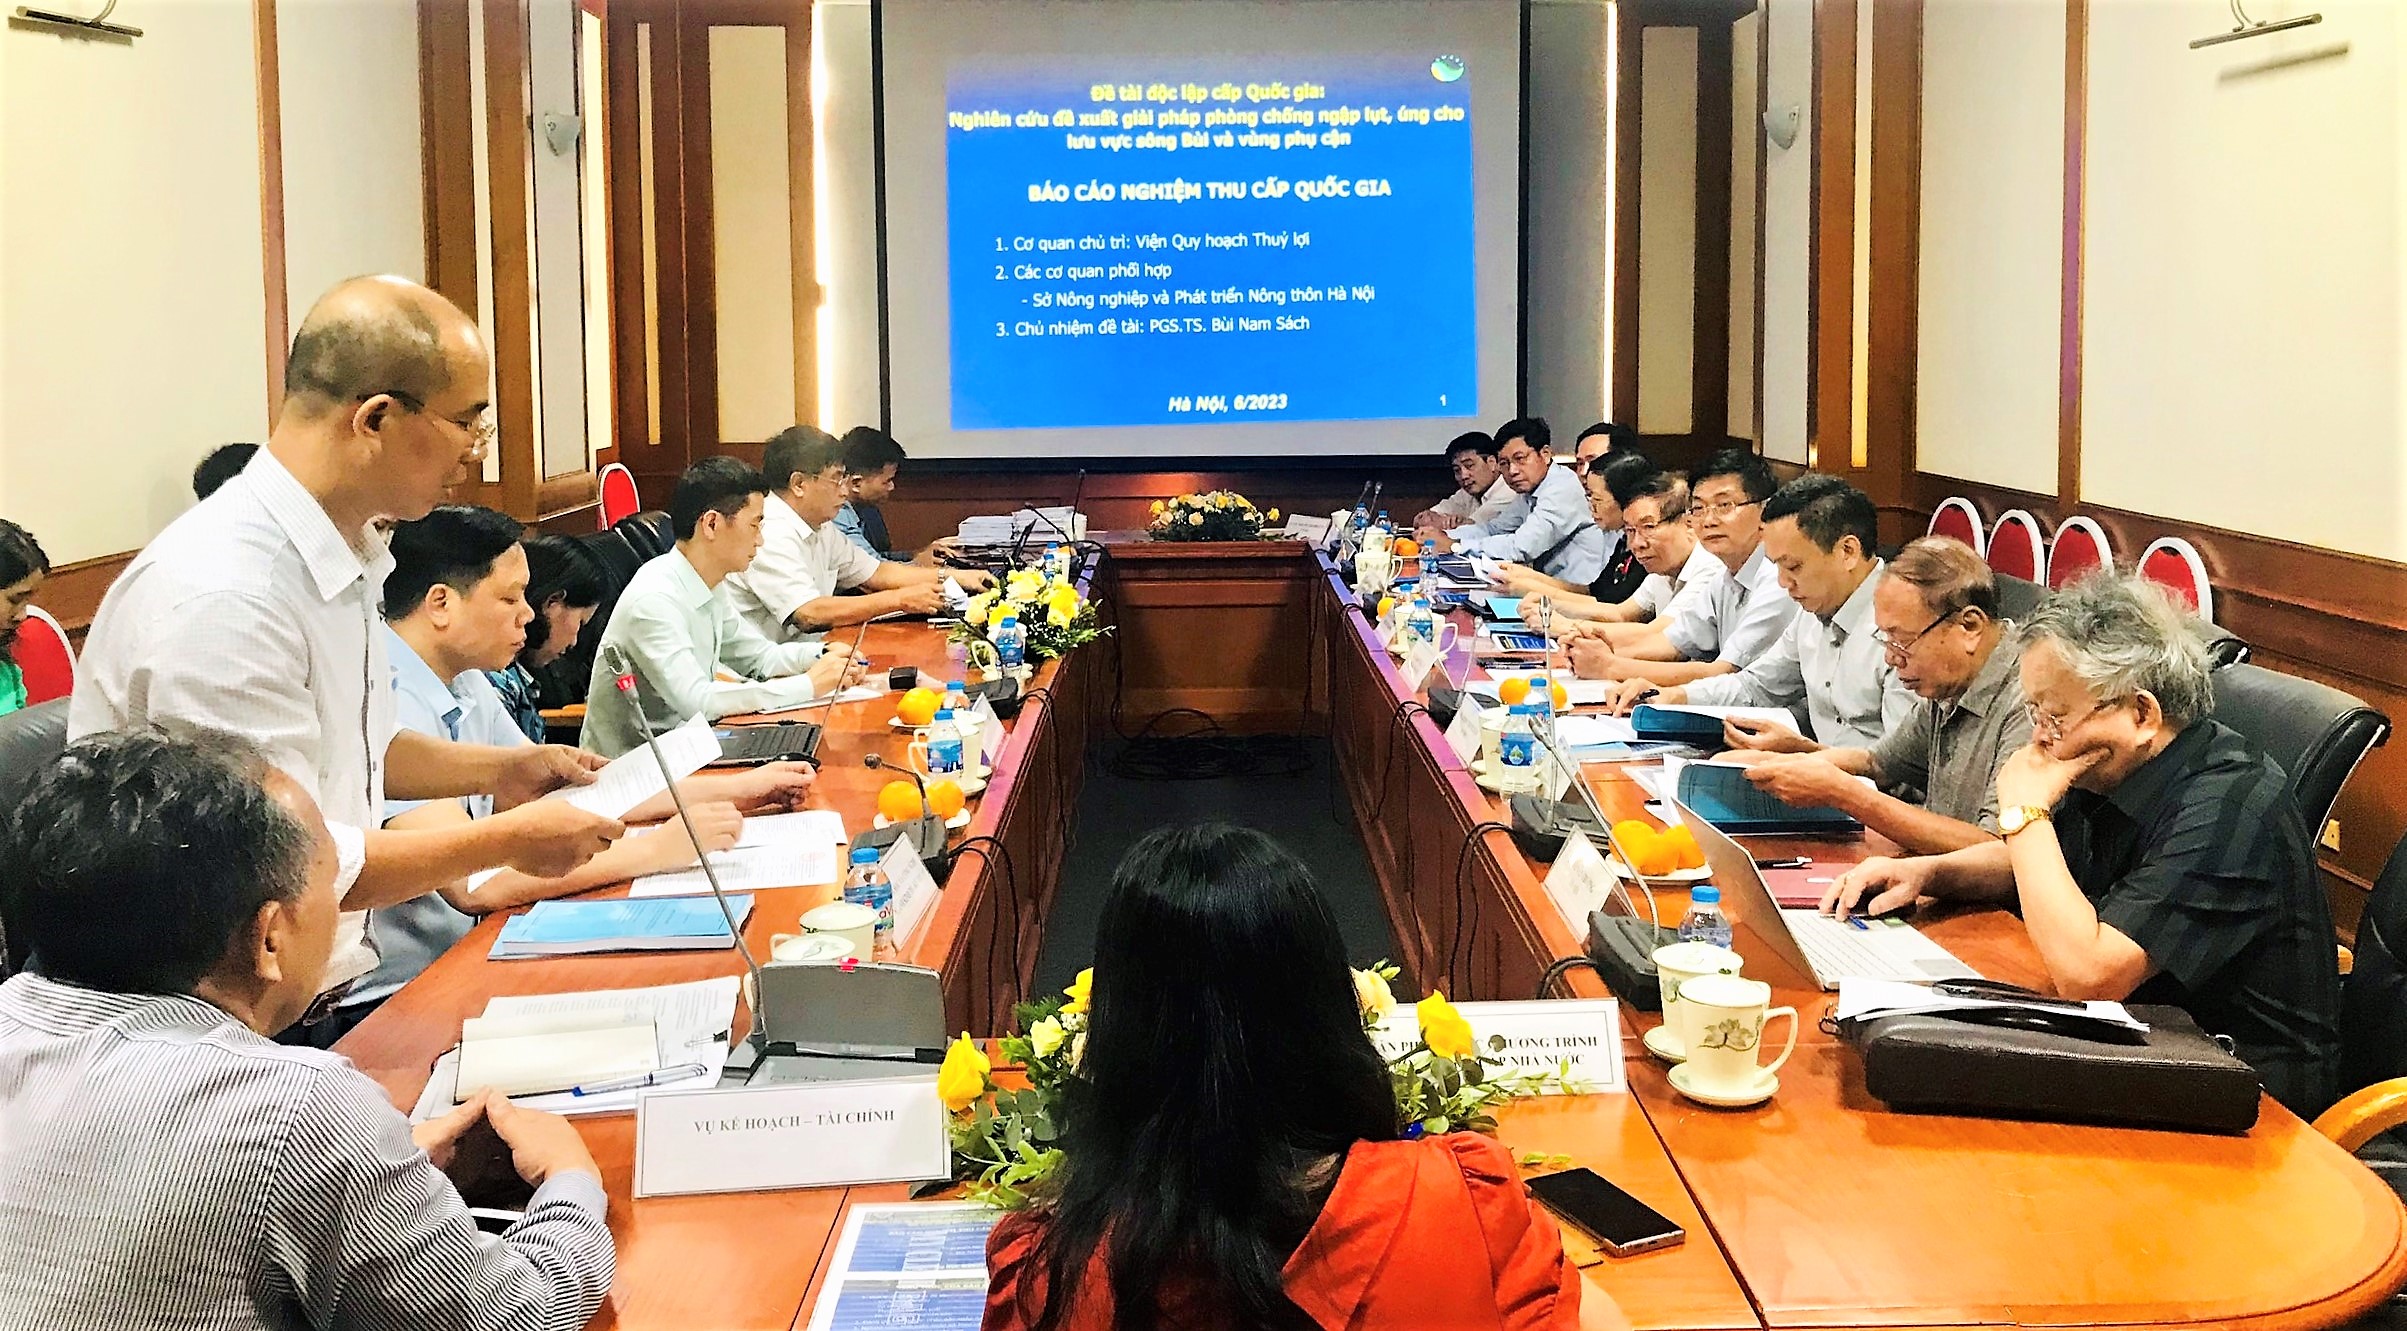 National-level acceptance meeting of the research titled 